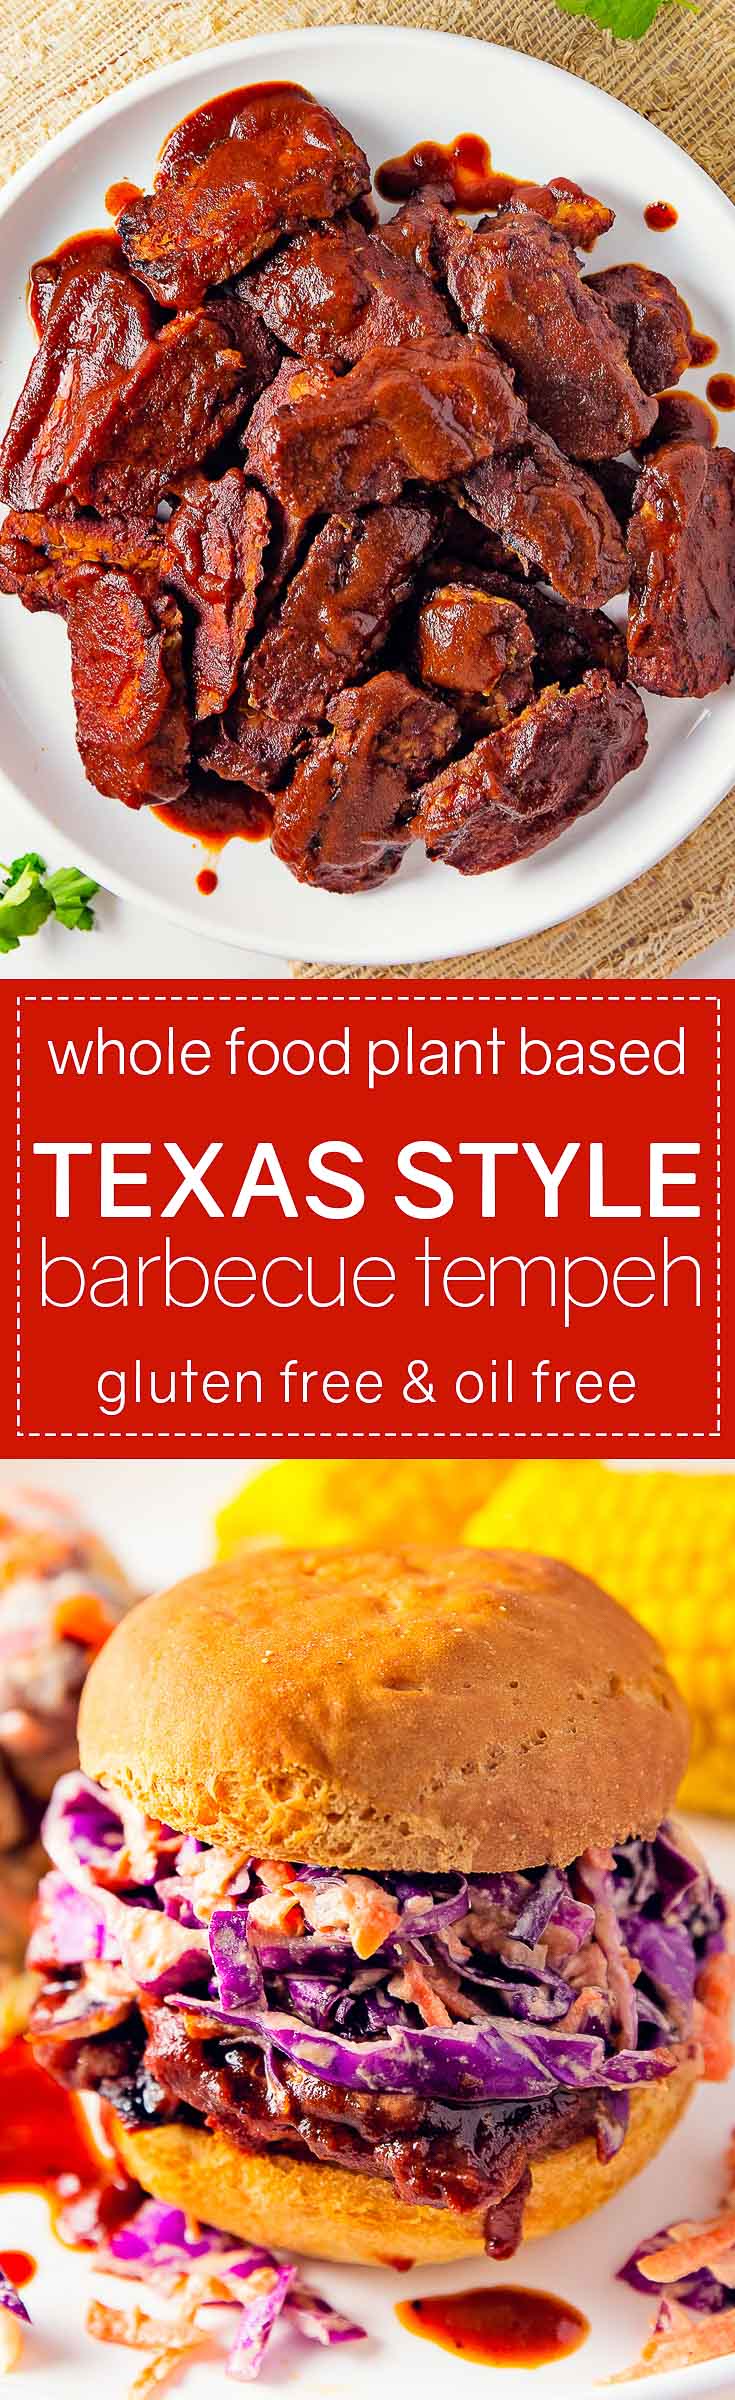 Texas Style Barbecue Tempeh, vegan, vegetarian, whole food plant based, gluten free, recipe, wfpb, healthy, oil free, no refined sugar, no oil, refined sugar free, dinner, side, side dish, dairy free, dinner party, entertaining